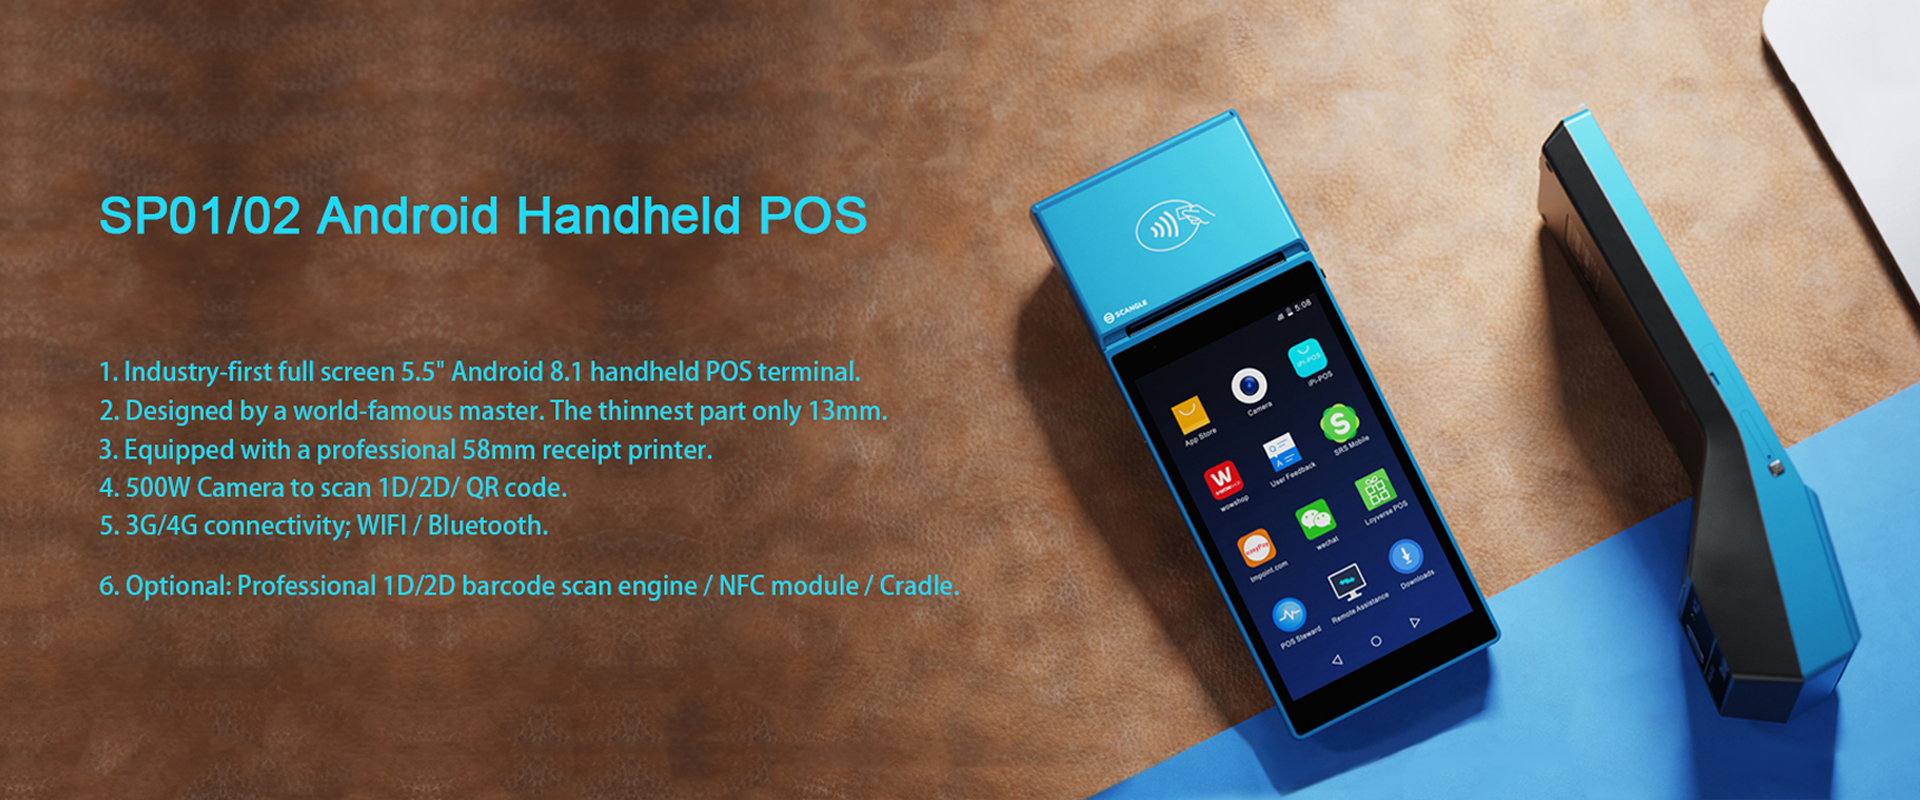 Scangle Android handheld POS SP01